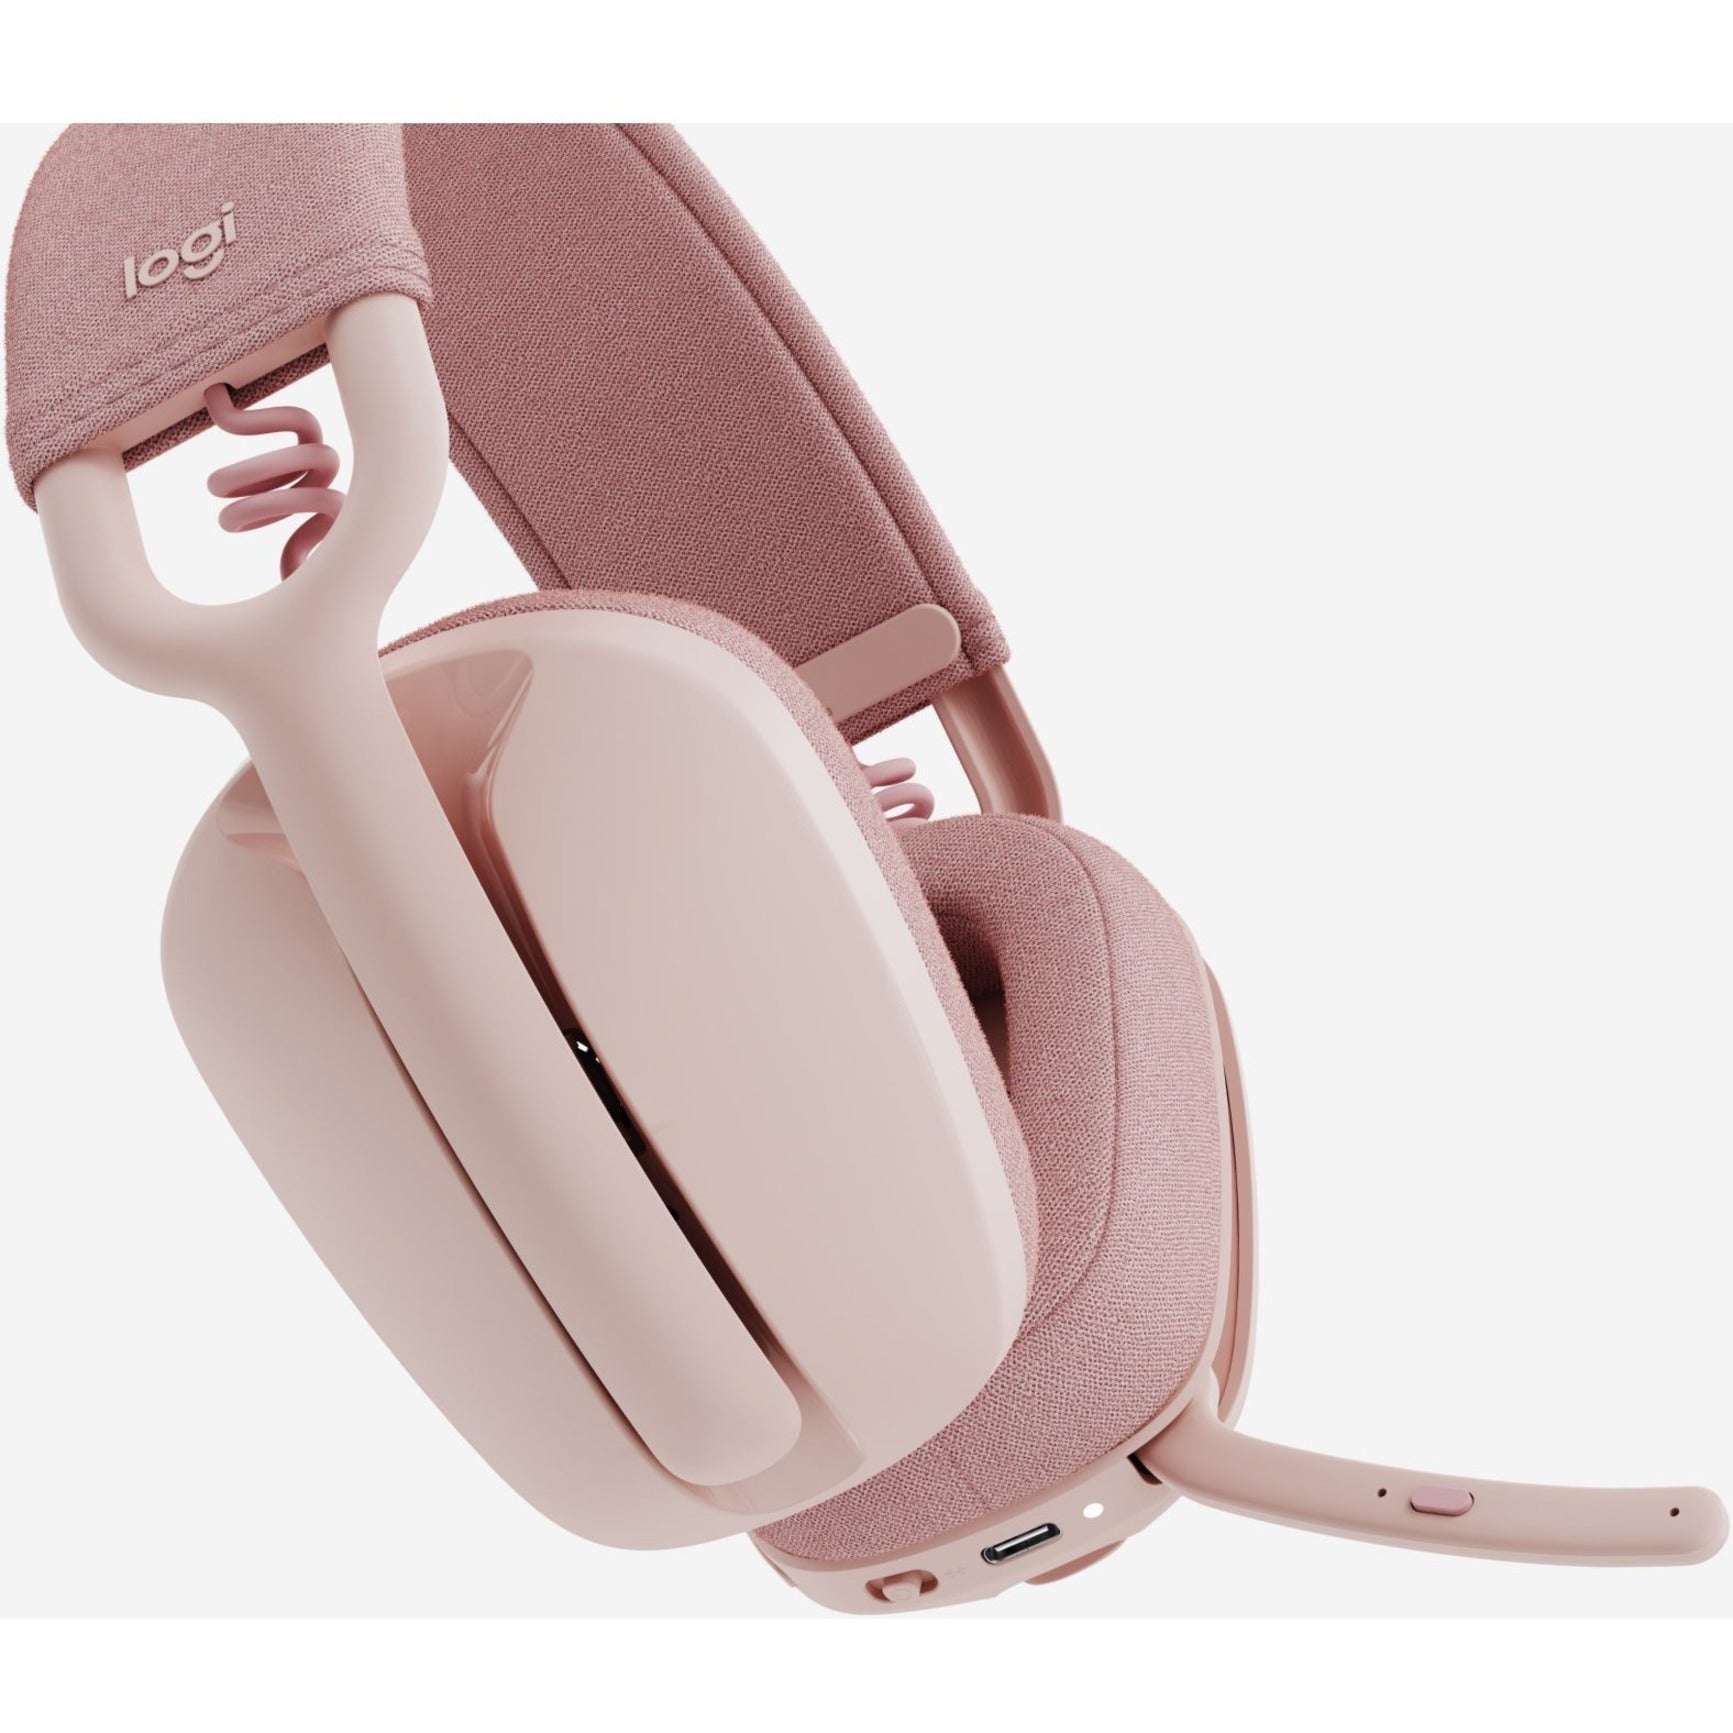 Logitech 981-001258 Zone Vibe 100 Rose, Wireless Bluetooth Headset with Noise Cancelling Microphone